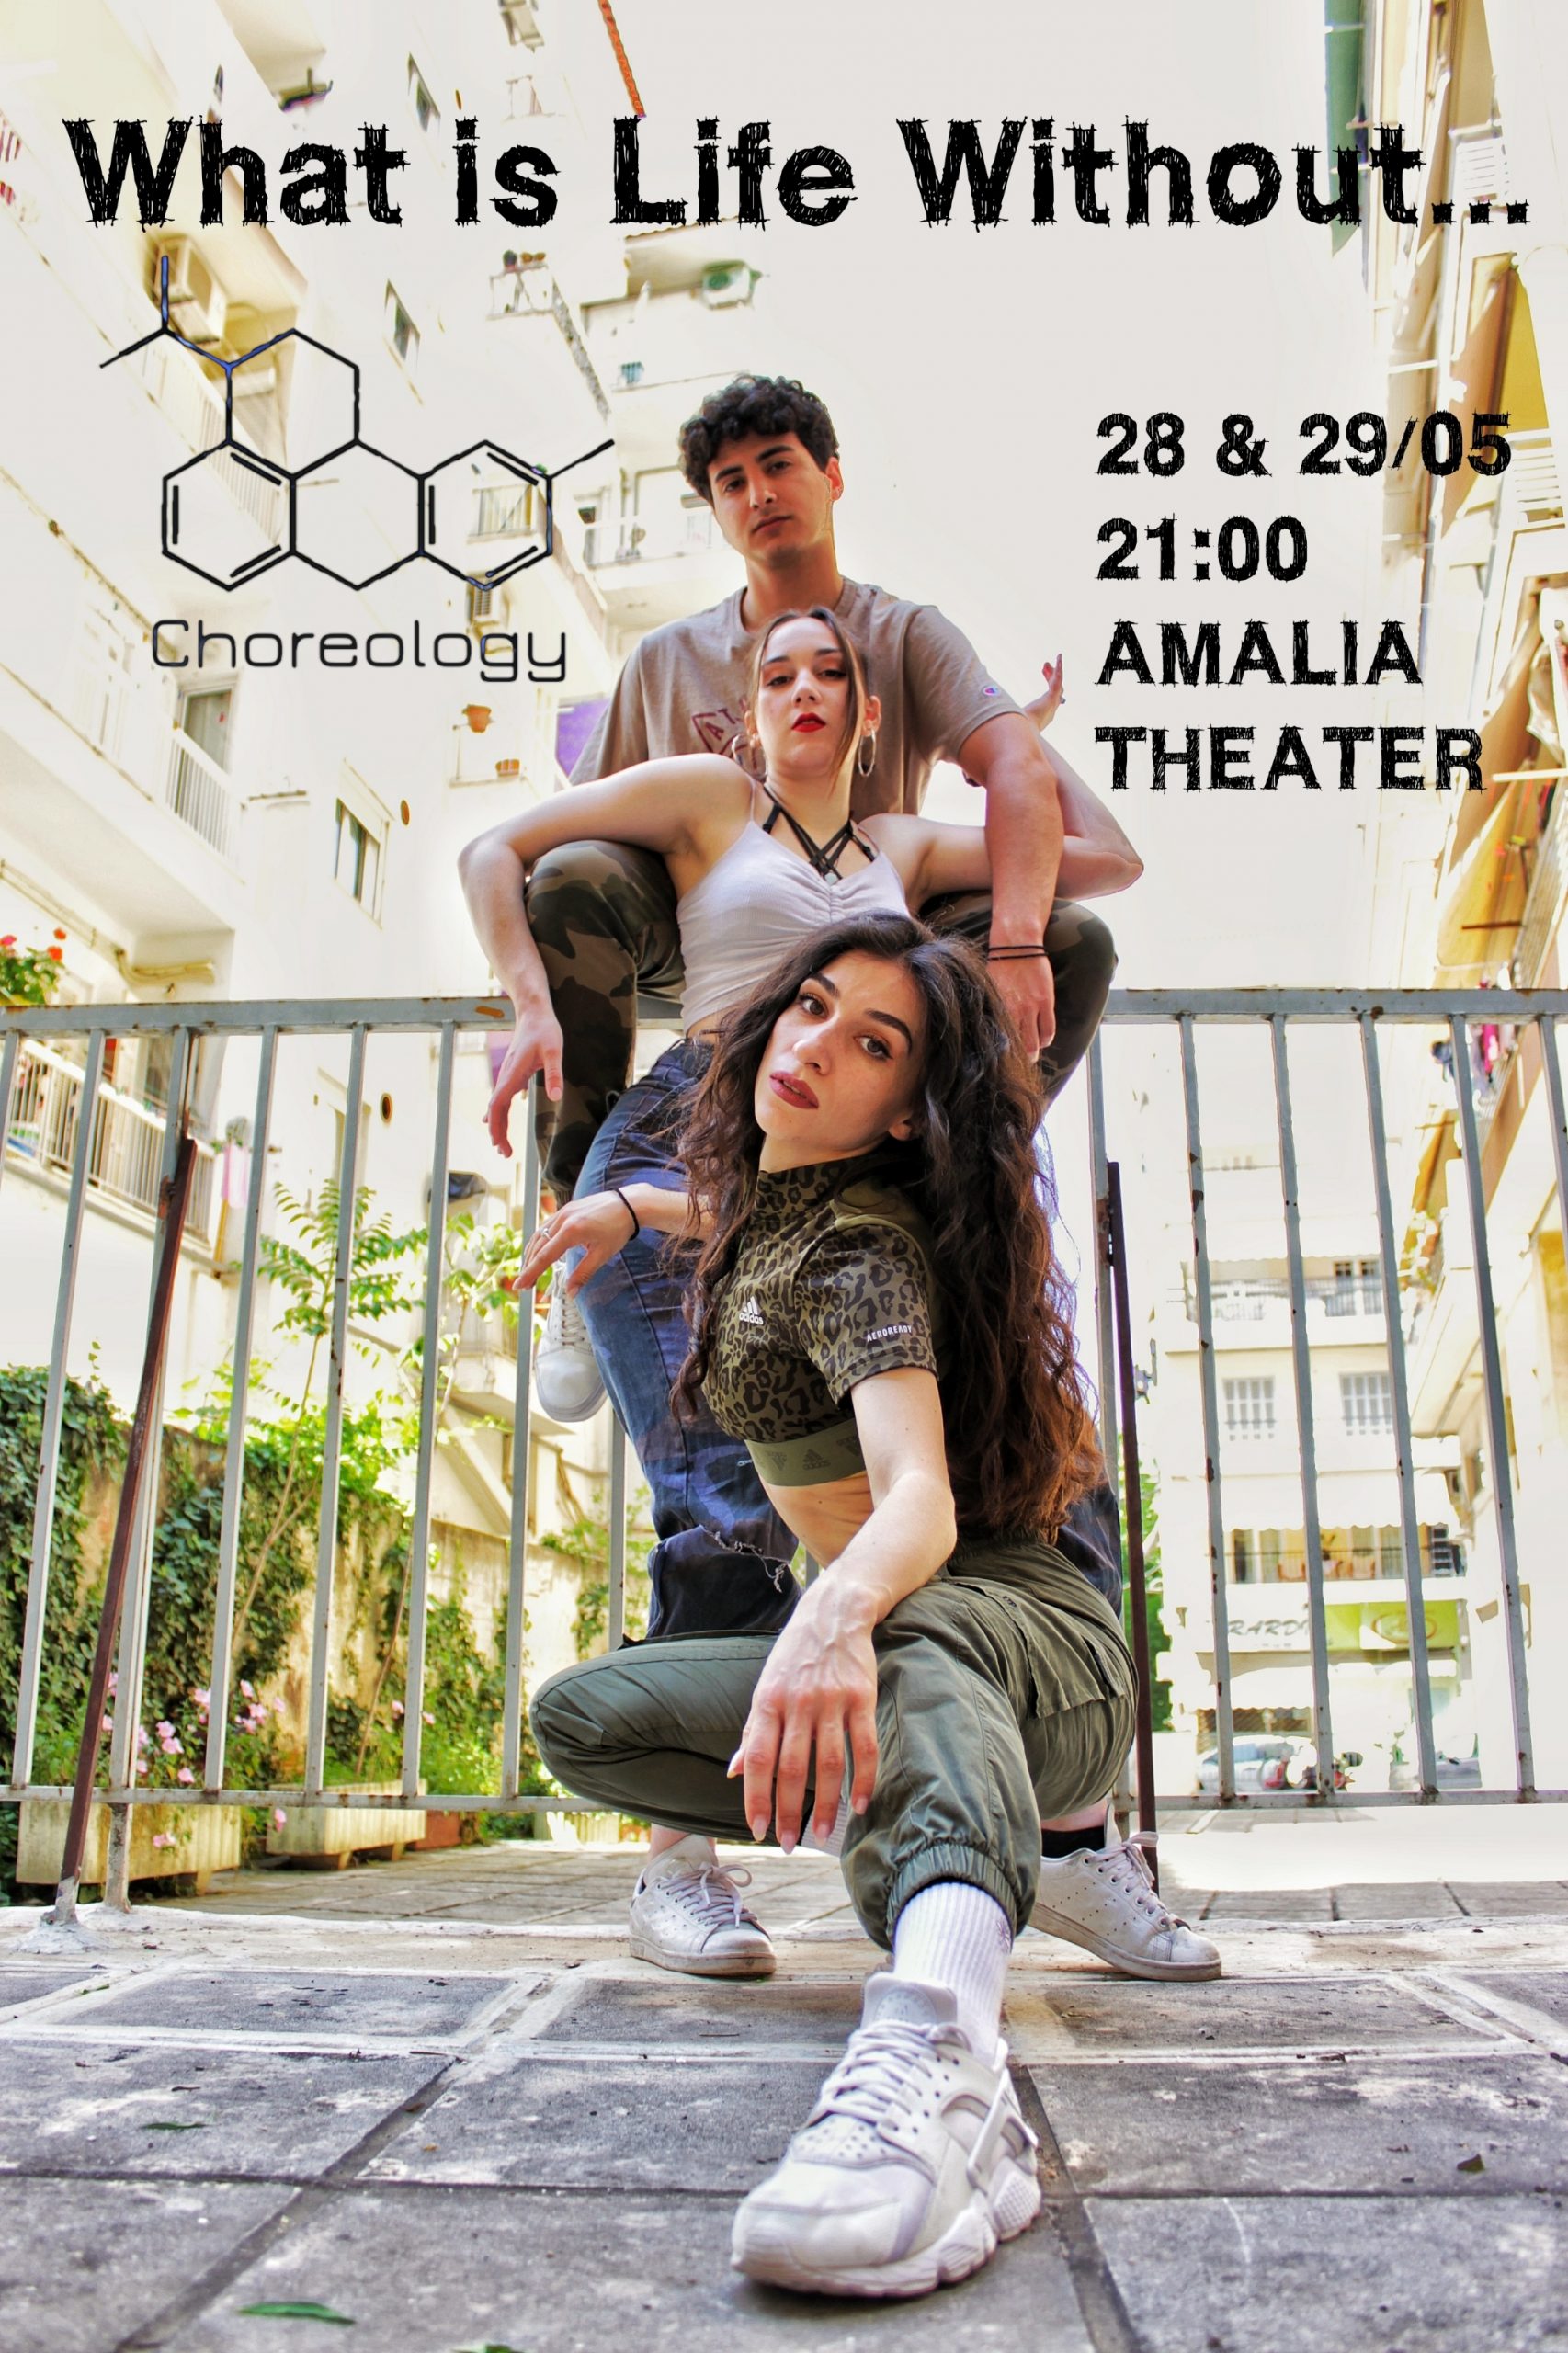 Xορευτική παράσταση “What is life without… A dance play by Choreology 2.0” από το ProDancers Studio